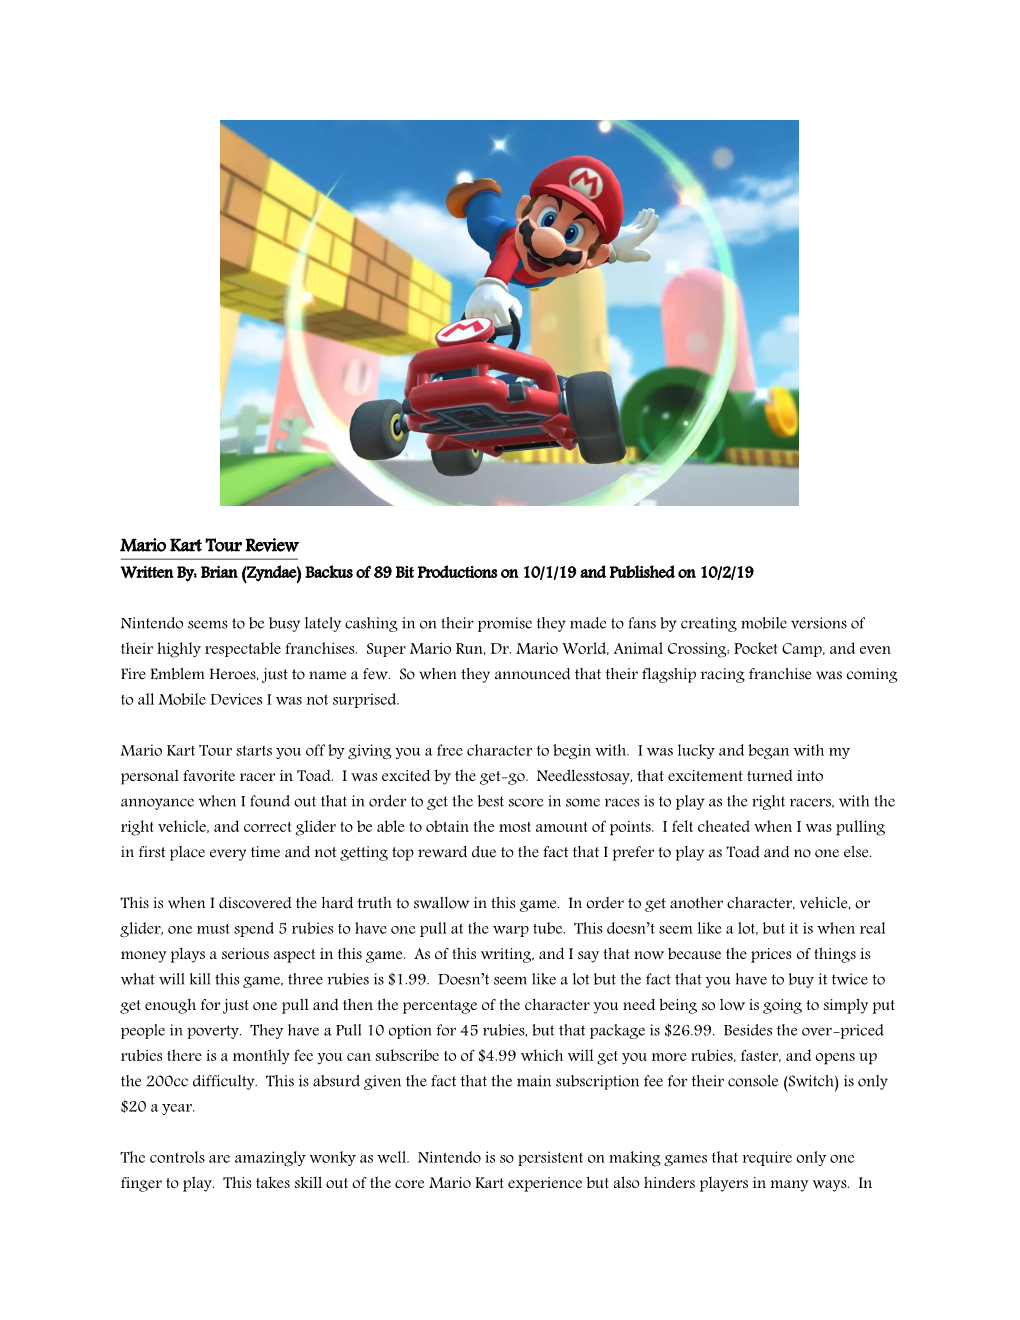 Mario Kart Tour Review Written By: Brian (Zyndae) Backus of 89 Bit Productions on 10/1/19 and Published on 10/2/19